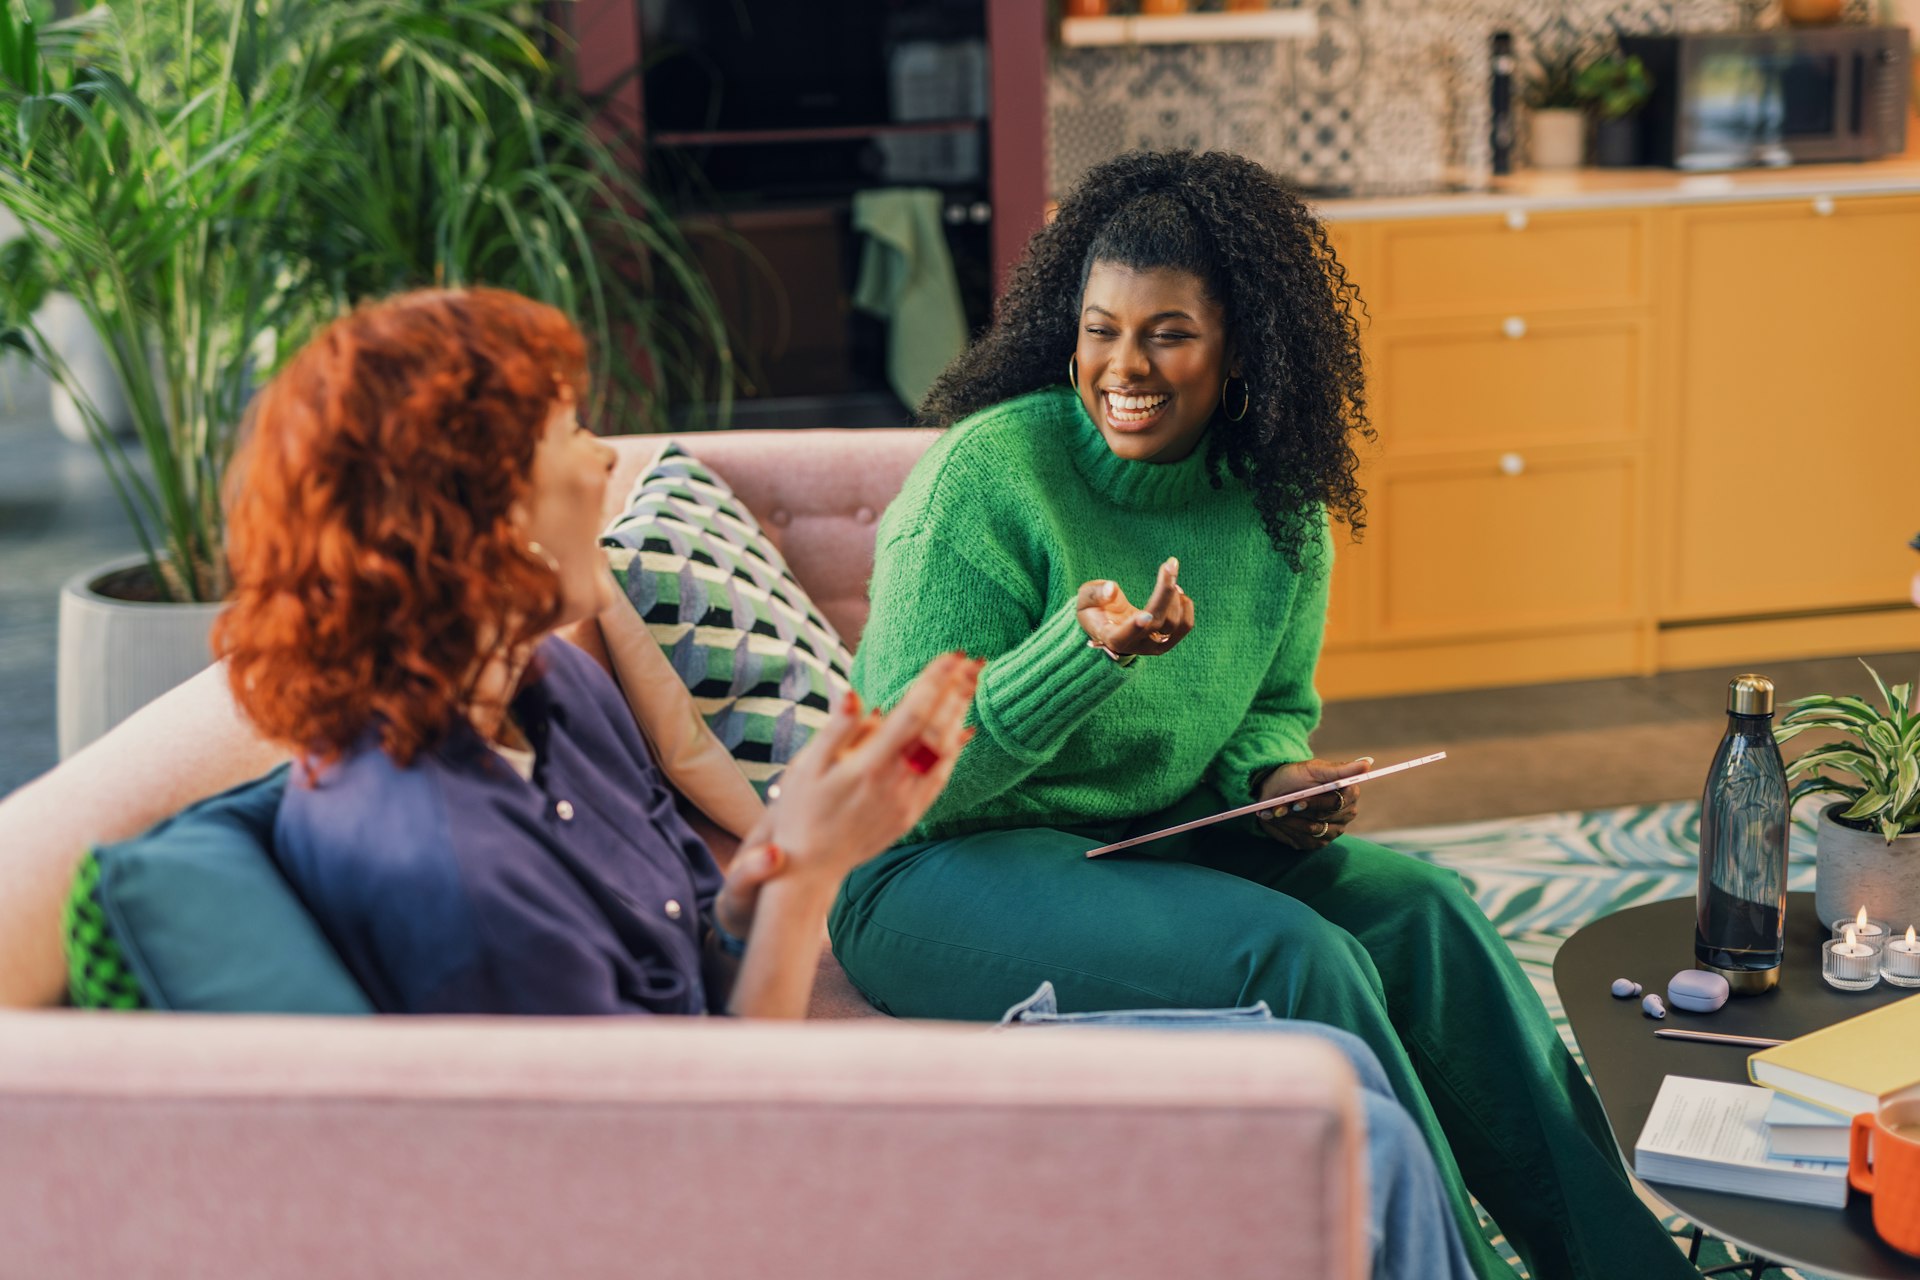 Image of two women conversing and laughing